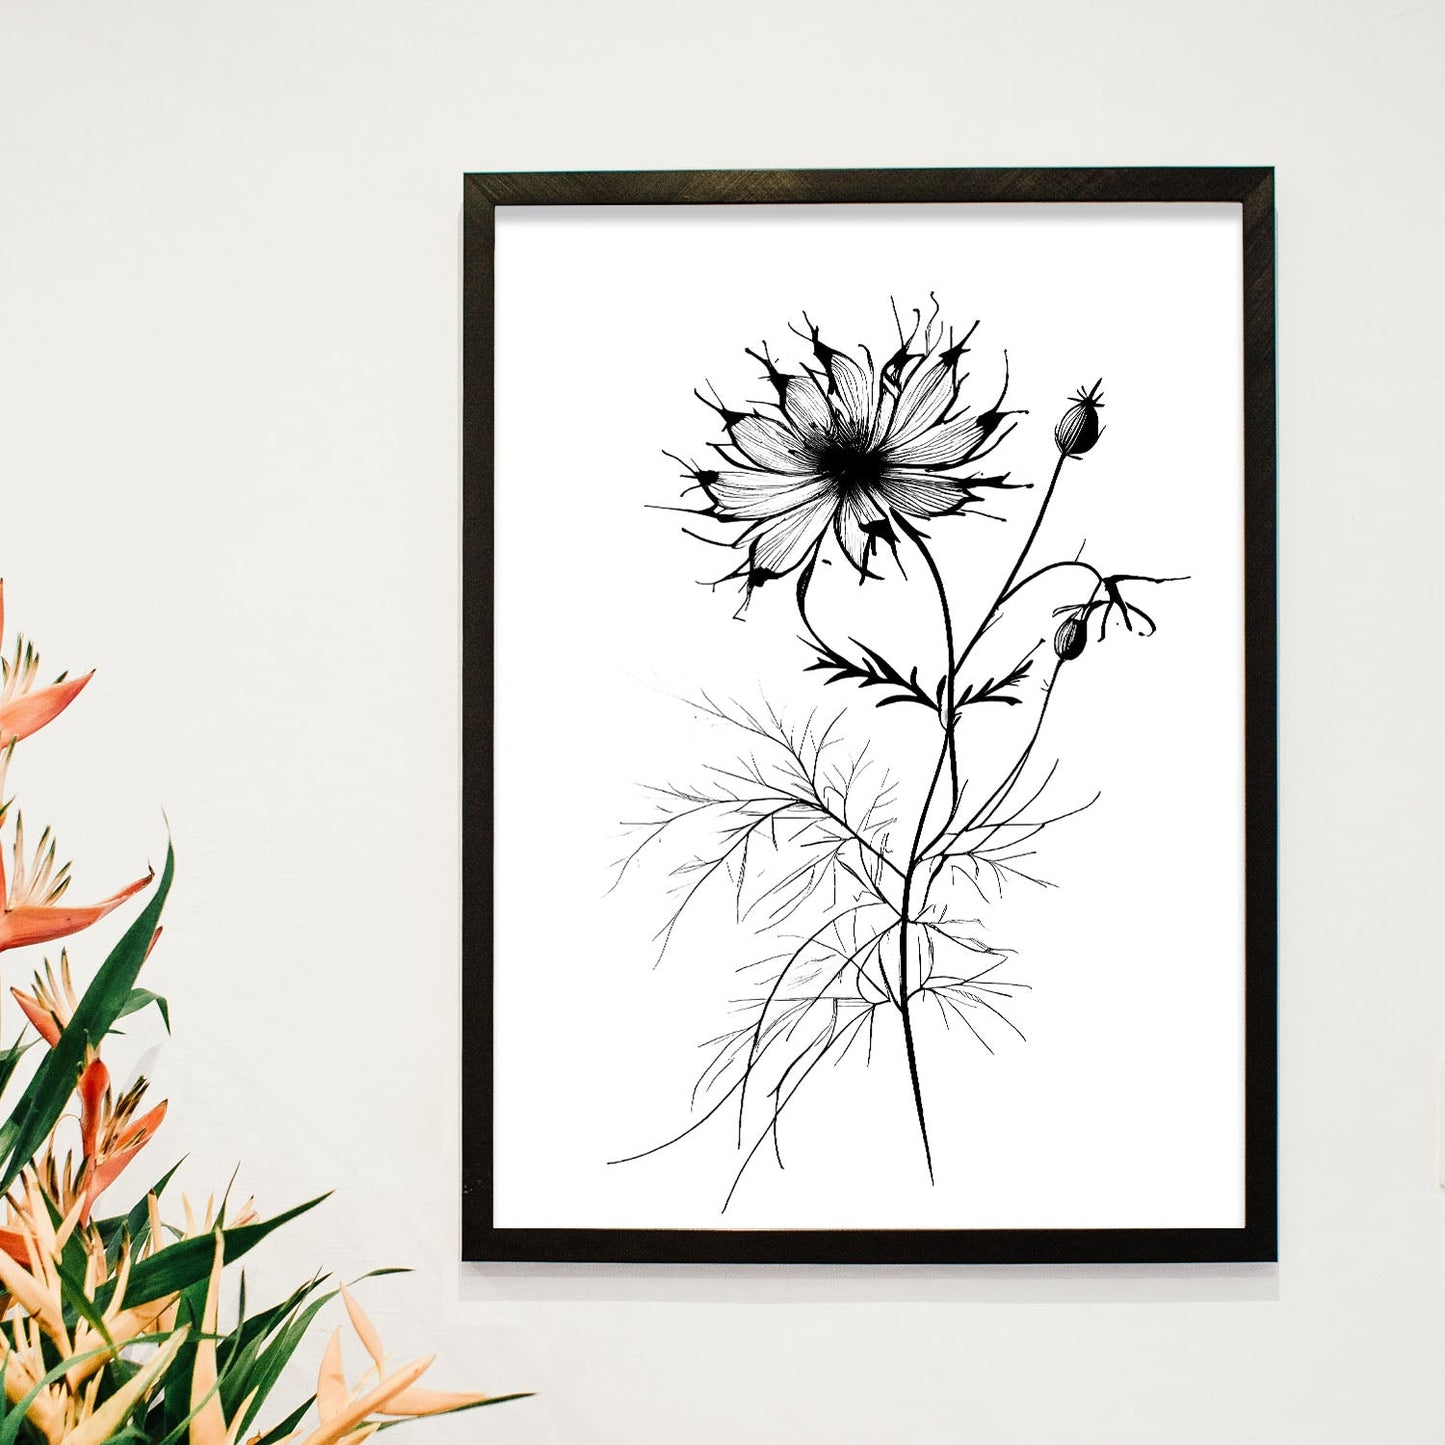 Nacnic Love-in-a-Mist Minimalist Line Art_2. Aesthetic Wall Art Prints for Bedroom or Living Room Design.